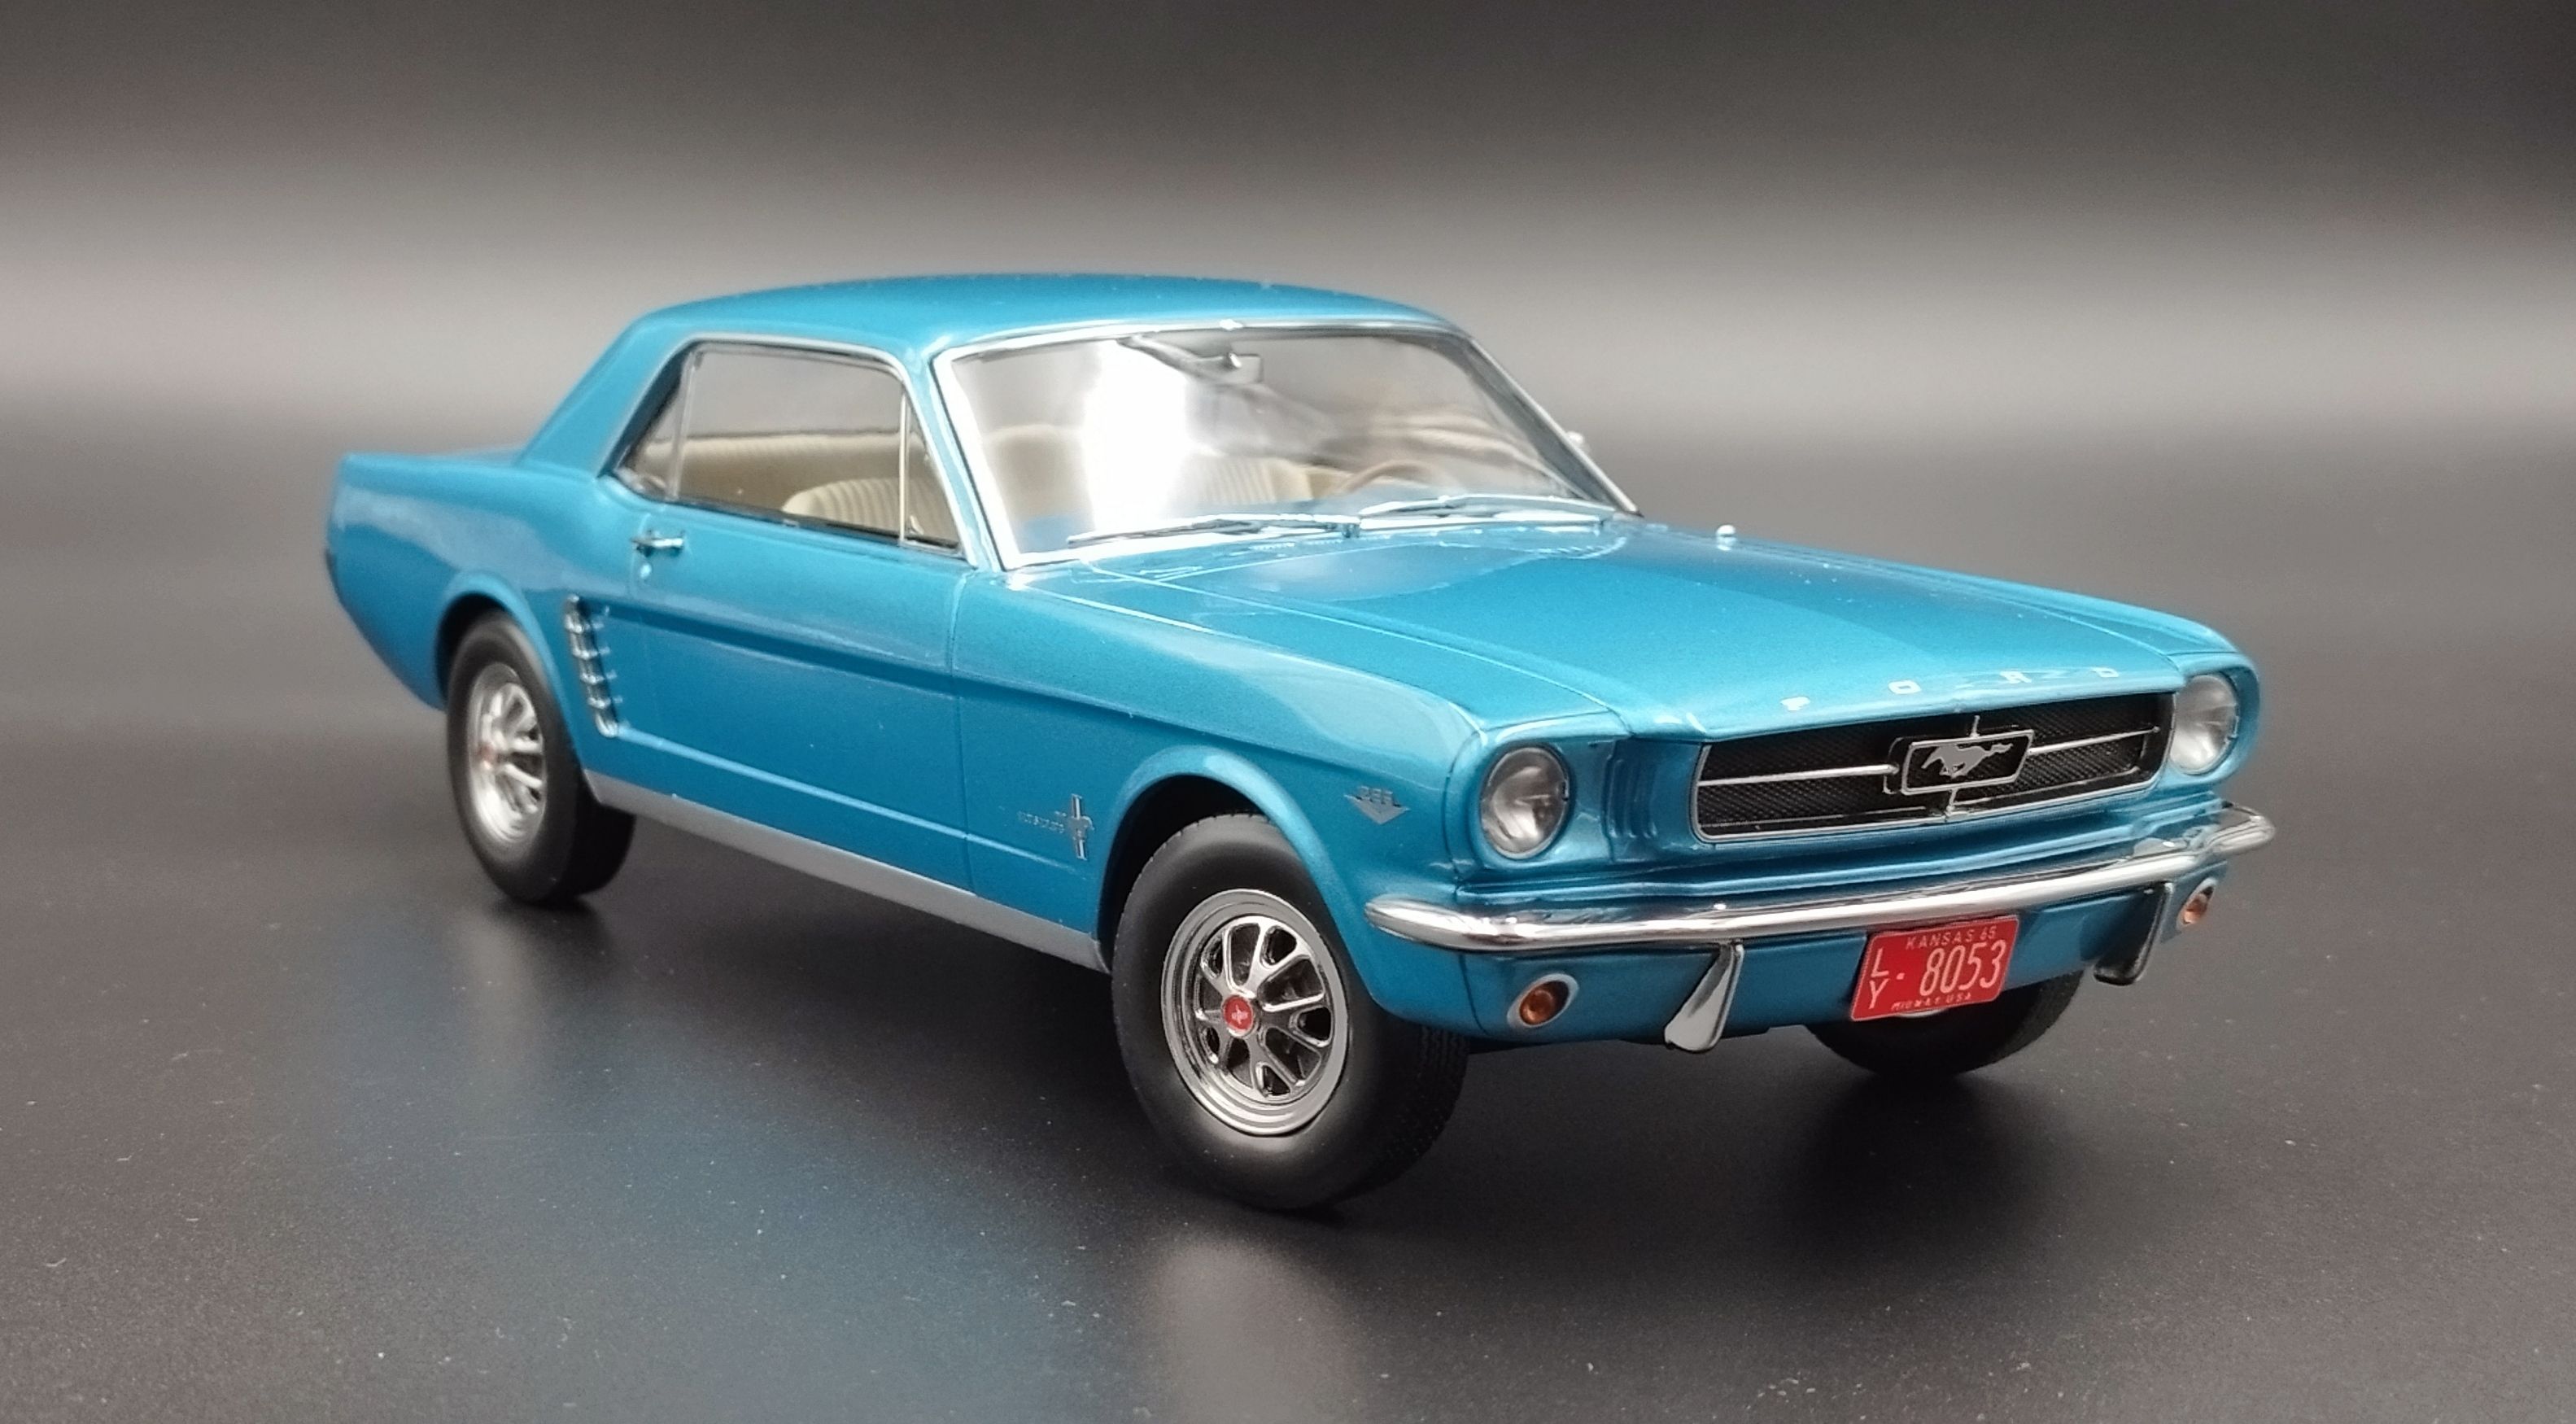 1:18 Norerv 1965 Ford Mustang Coupe model nowy